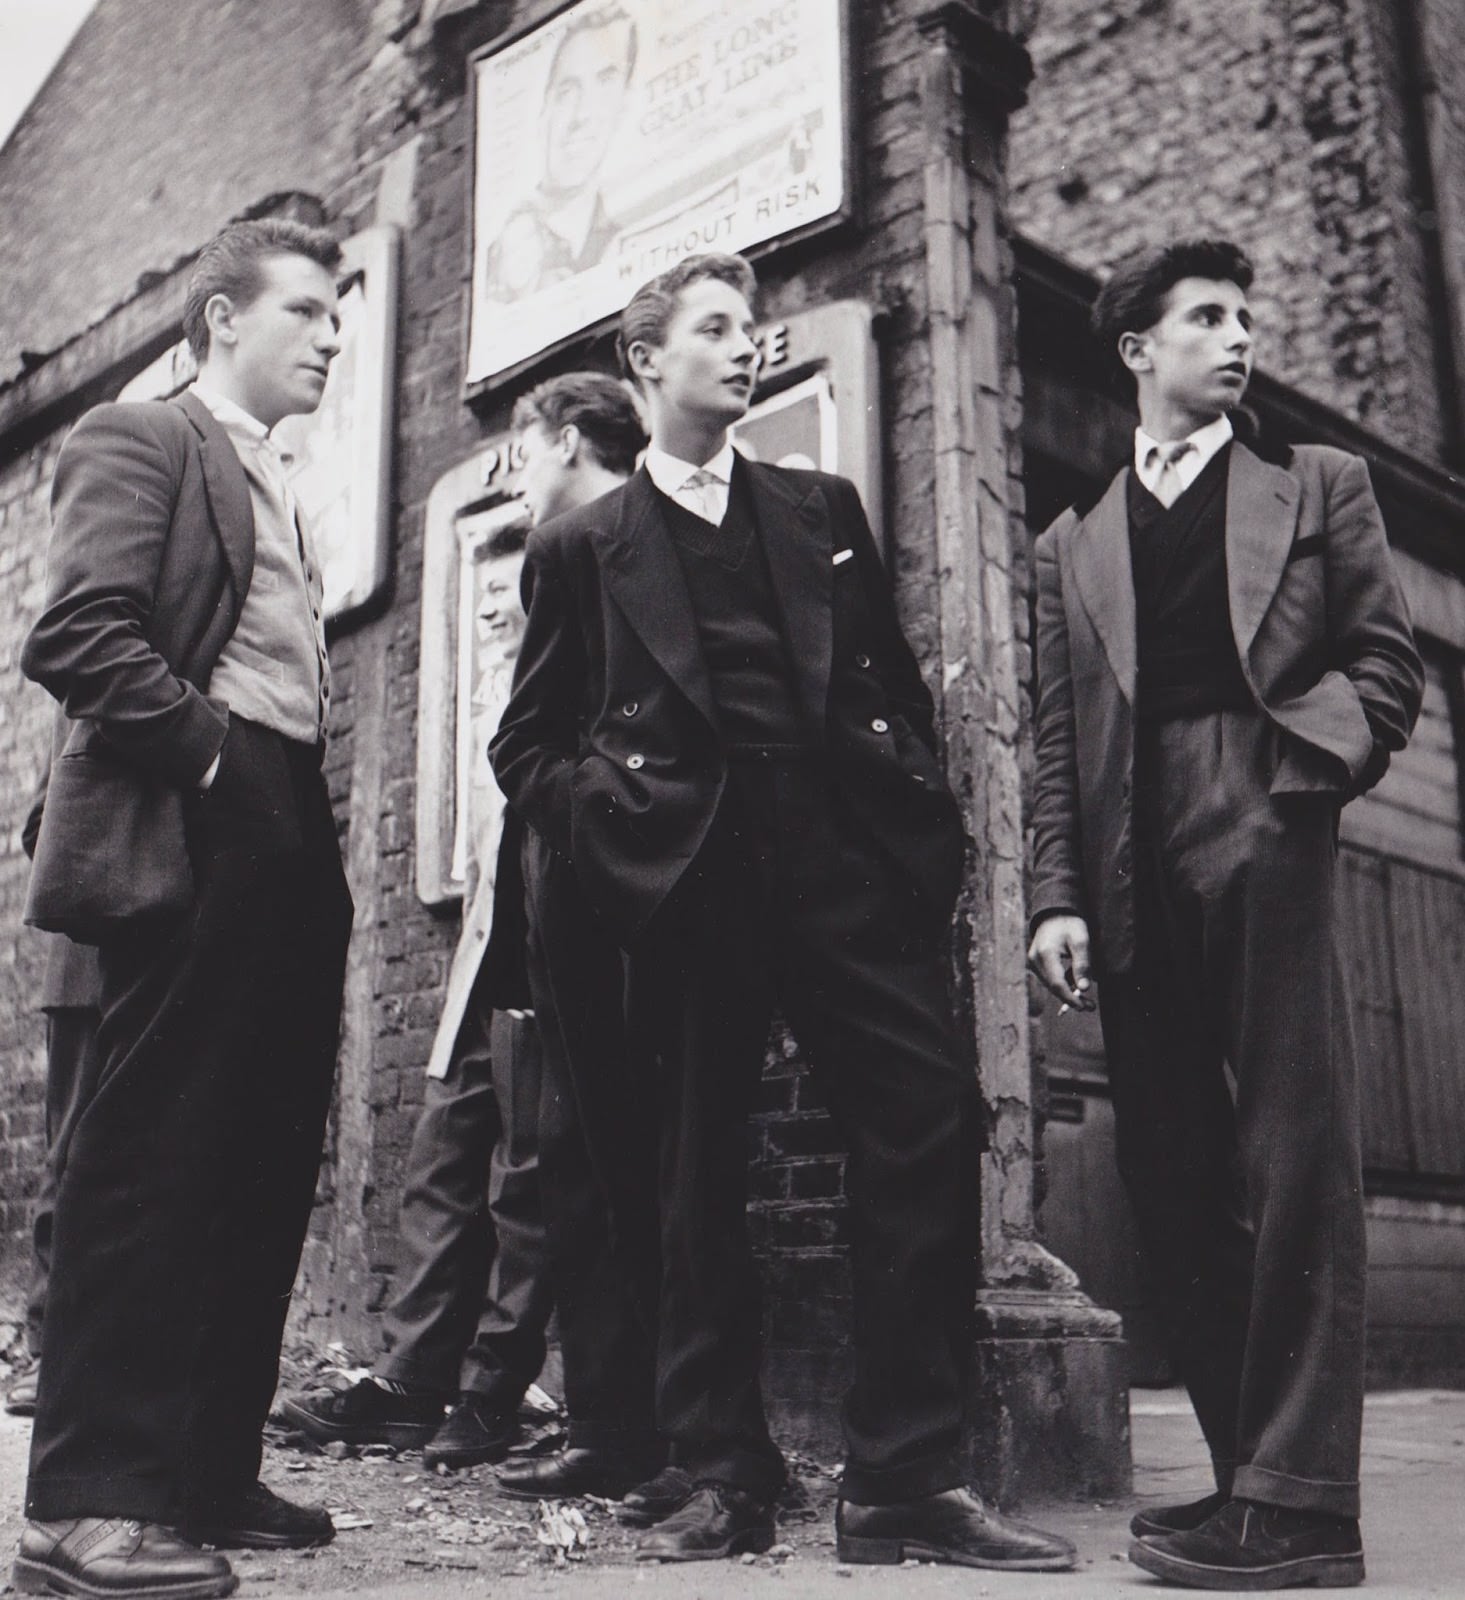 Teddy Boys gather outside a Picture House on the Old Kent Road, 1955.